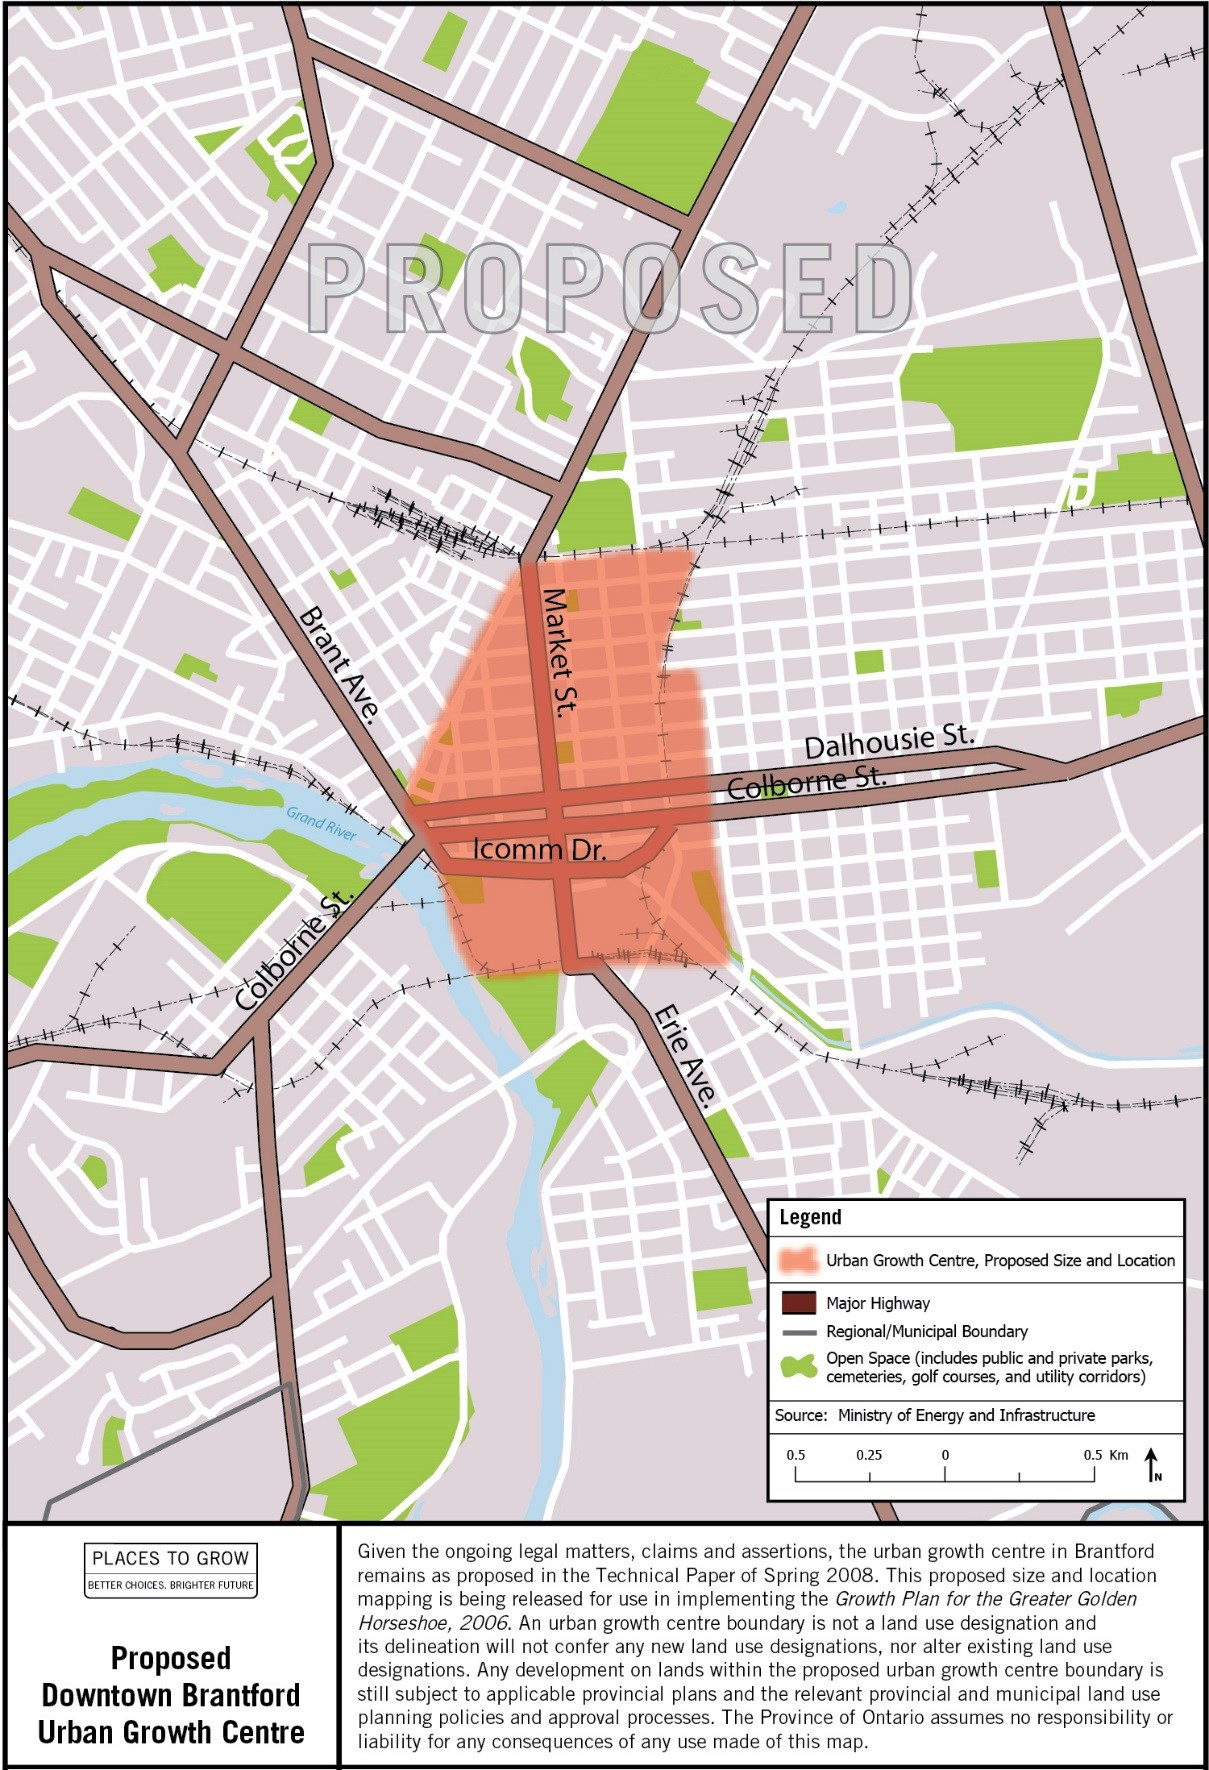 Map of the approximate size and location of the Proposed Downtown Brantford Urban Growth Centre in the vicinity of Market and Dalhousie Streets.